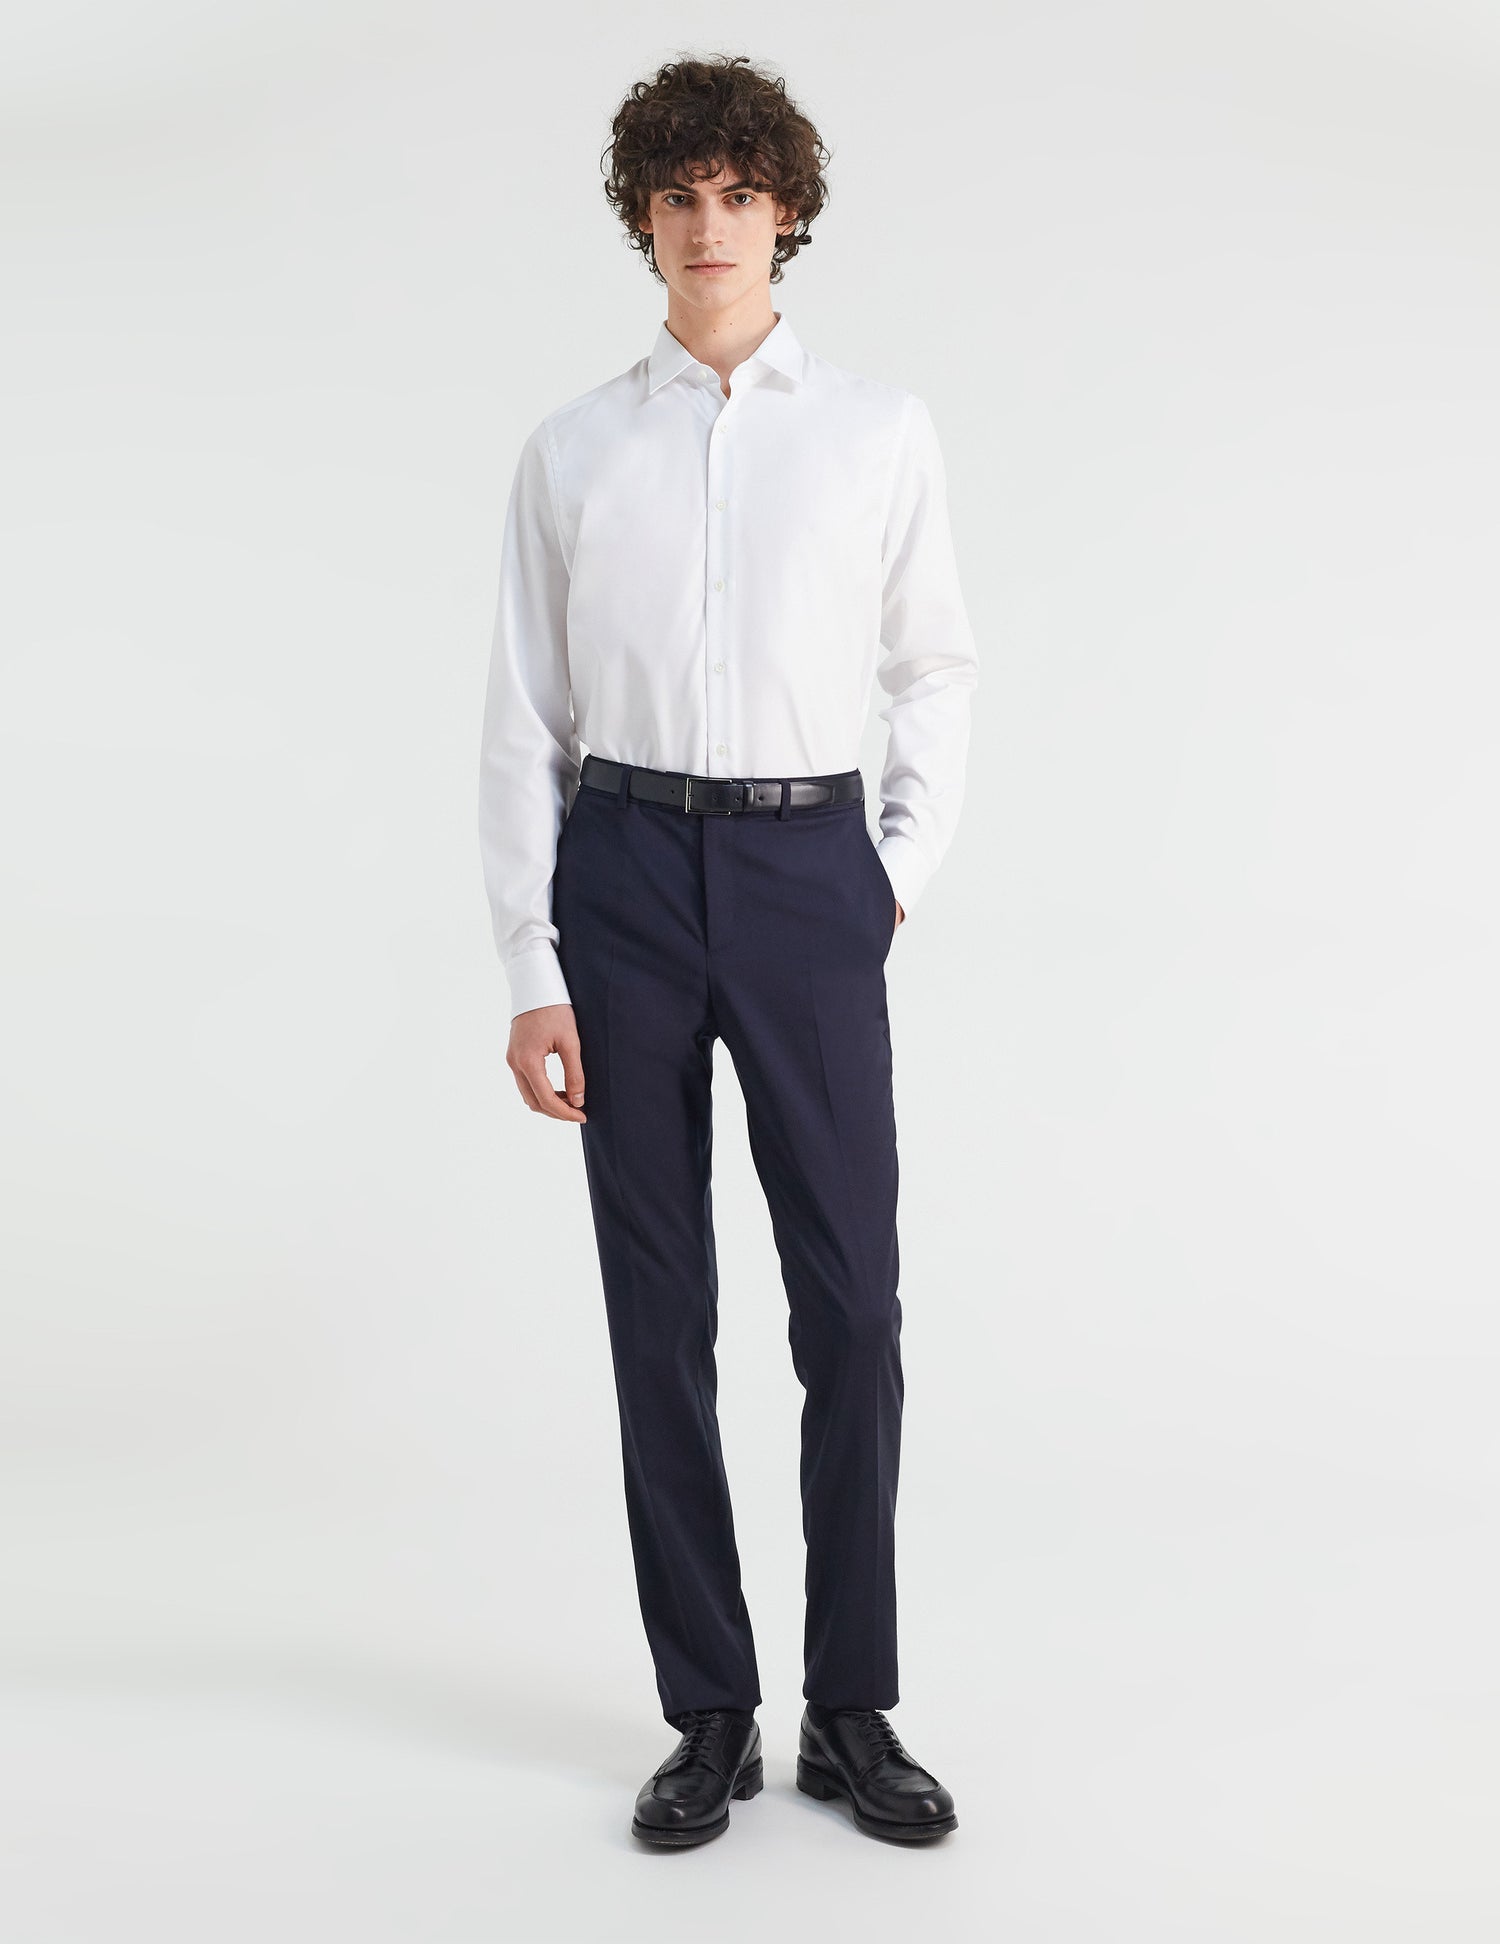 Semi-fitted white shirt - Fashioned - Figaret Collar#5